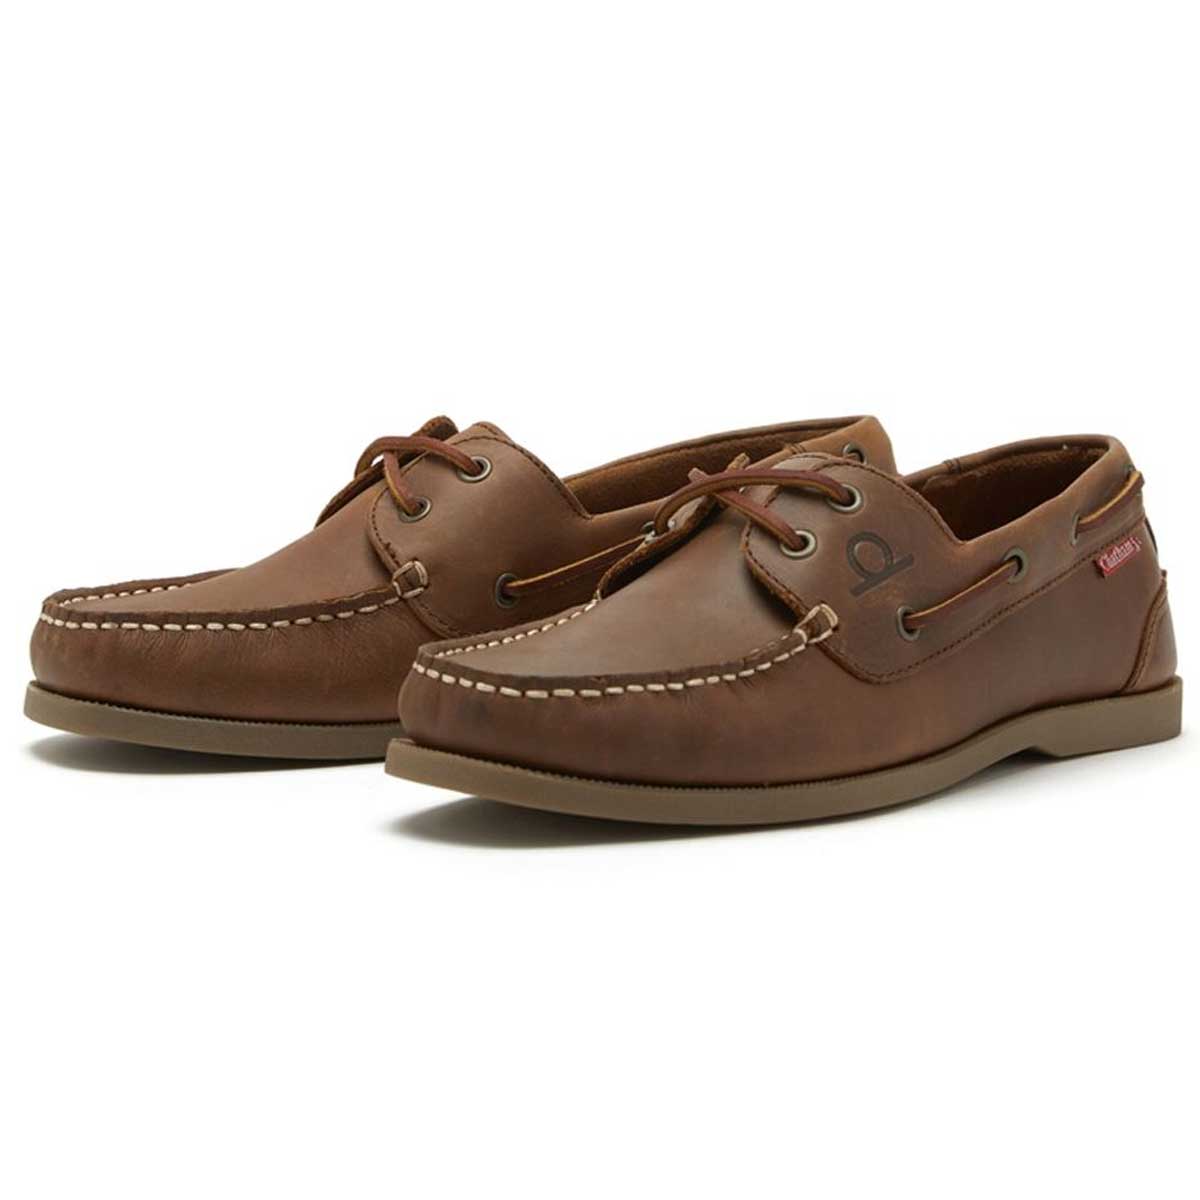 CHATHAM Galley II Leather Boat Shoes - Men's - Dark Tan